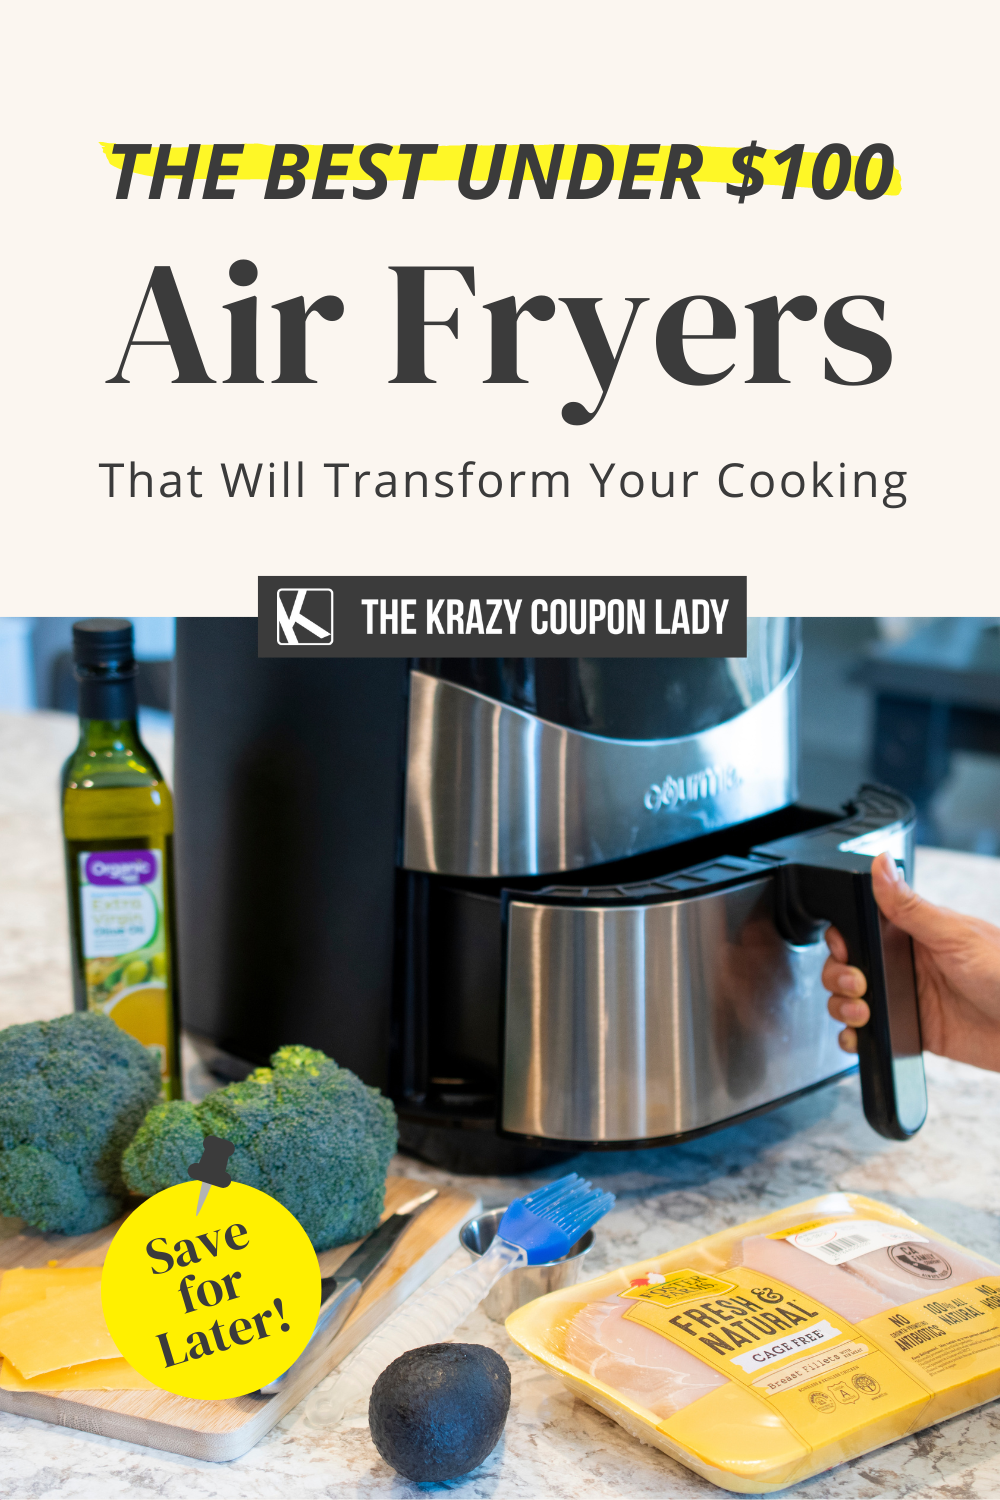 https://thekrazycouponlady.com/wp-content/uploads/2022/08/10-best-air-fryers-under-100-that-will-transform-your-cooking-1659968267-1659968267.png